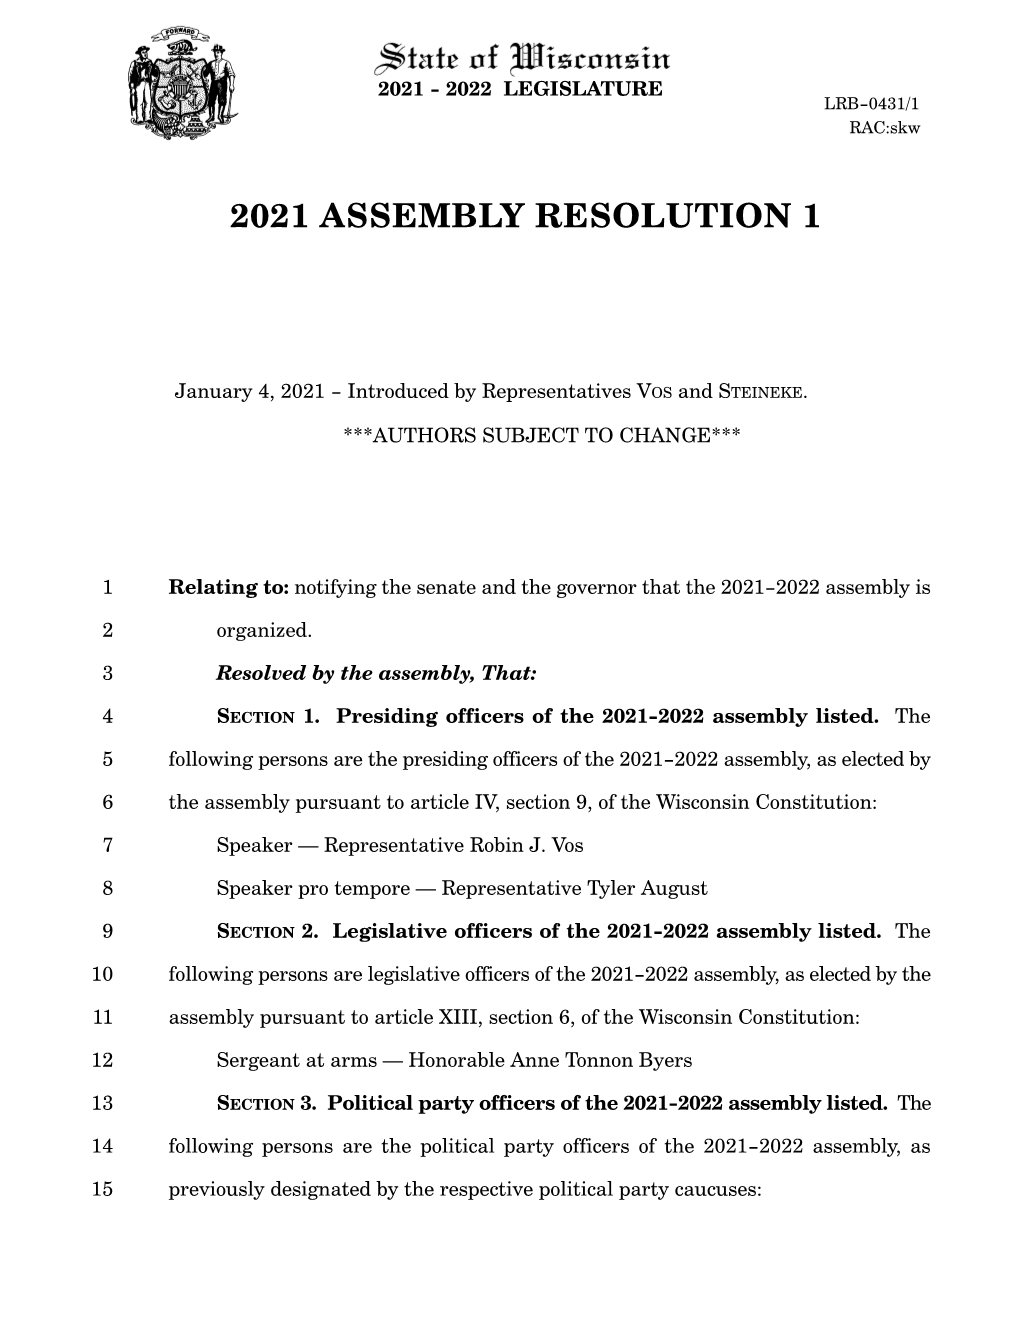 2021 Assembly Resolution 1